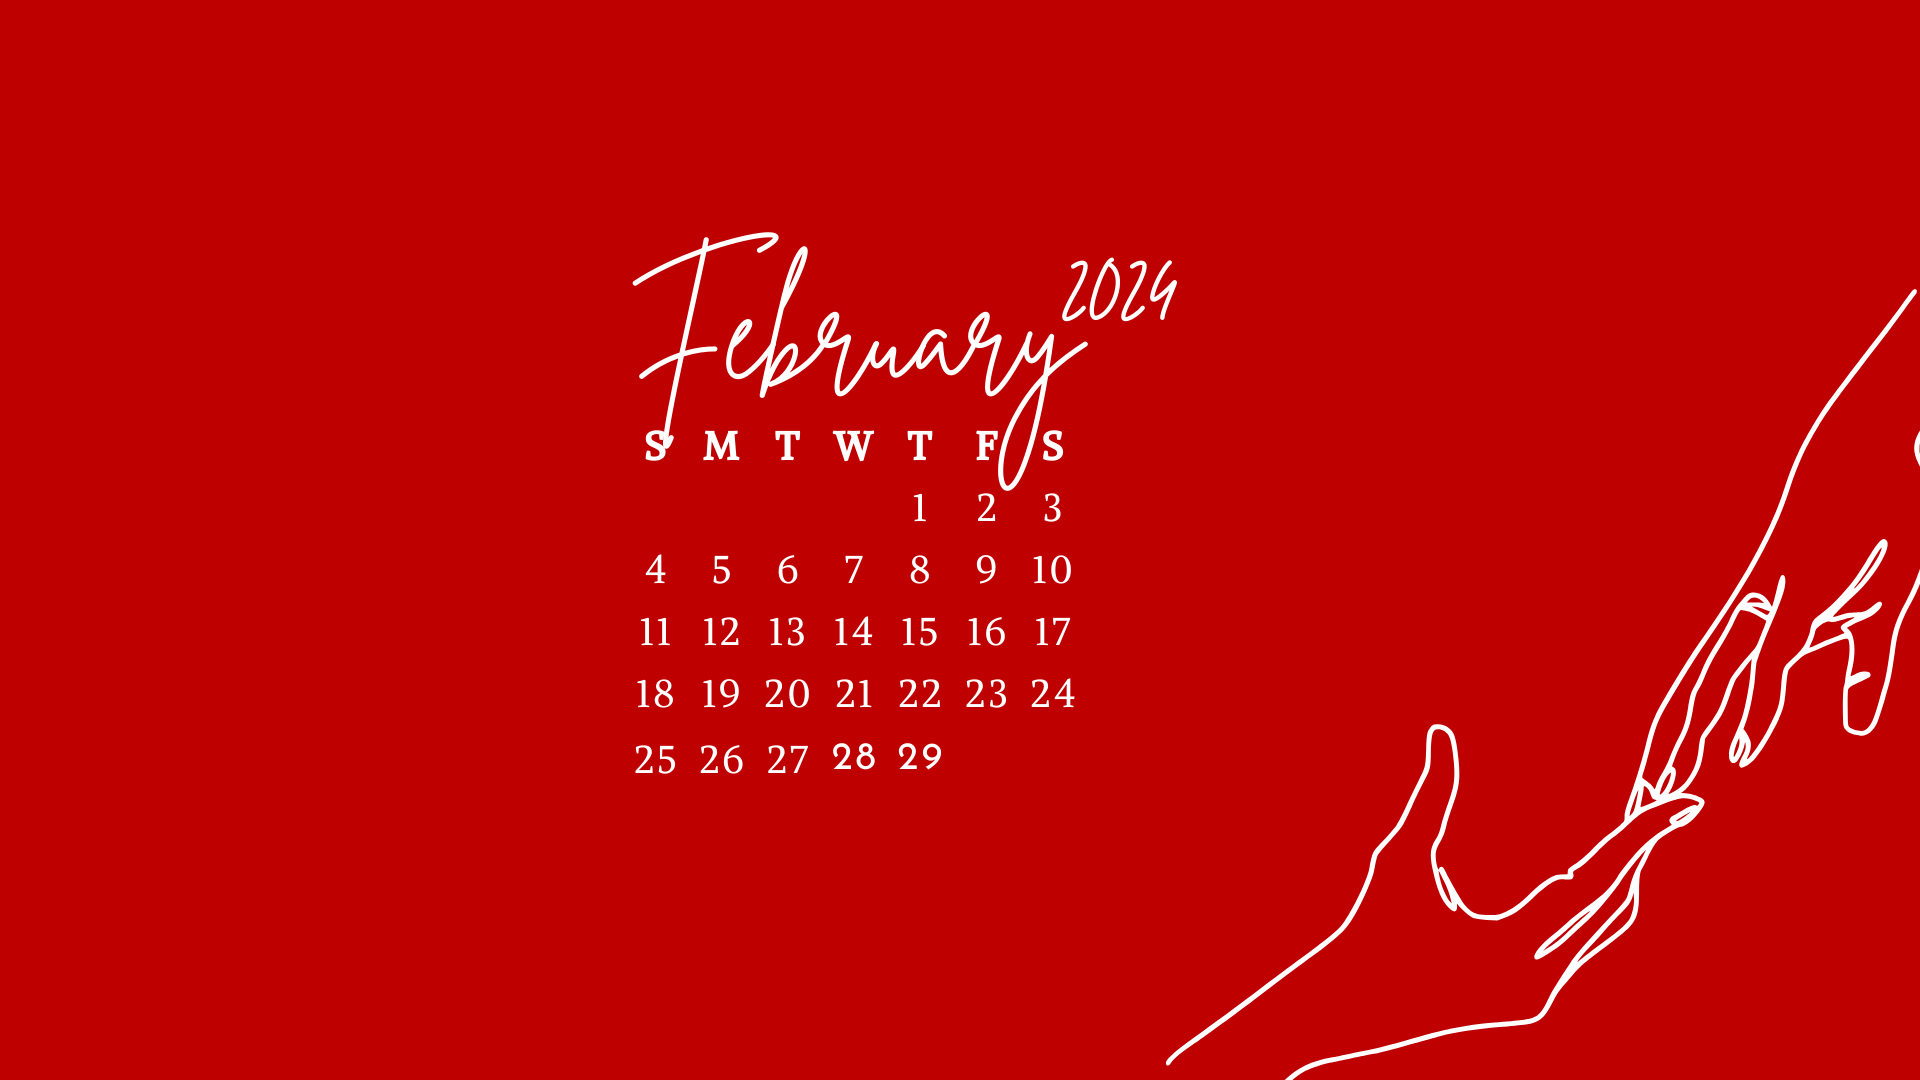 Free February 2024 Desktop Calendar Backgrounds; Here are your free February backgrounds for computers and laptops. Tech freebies for this month!